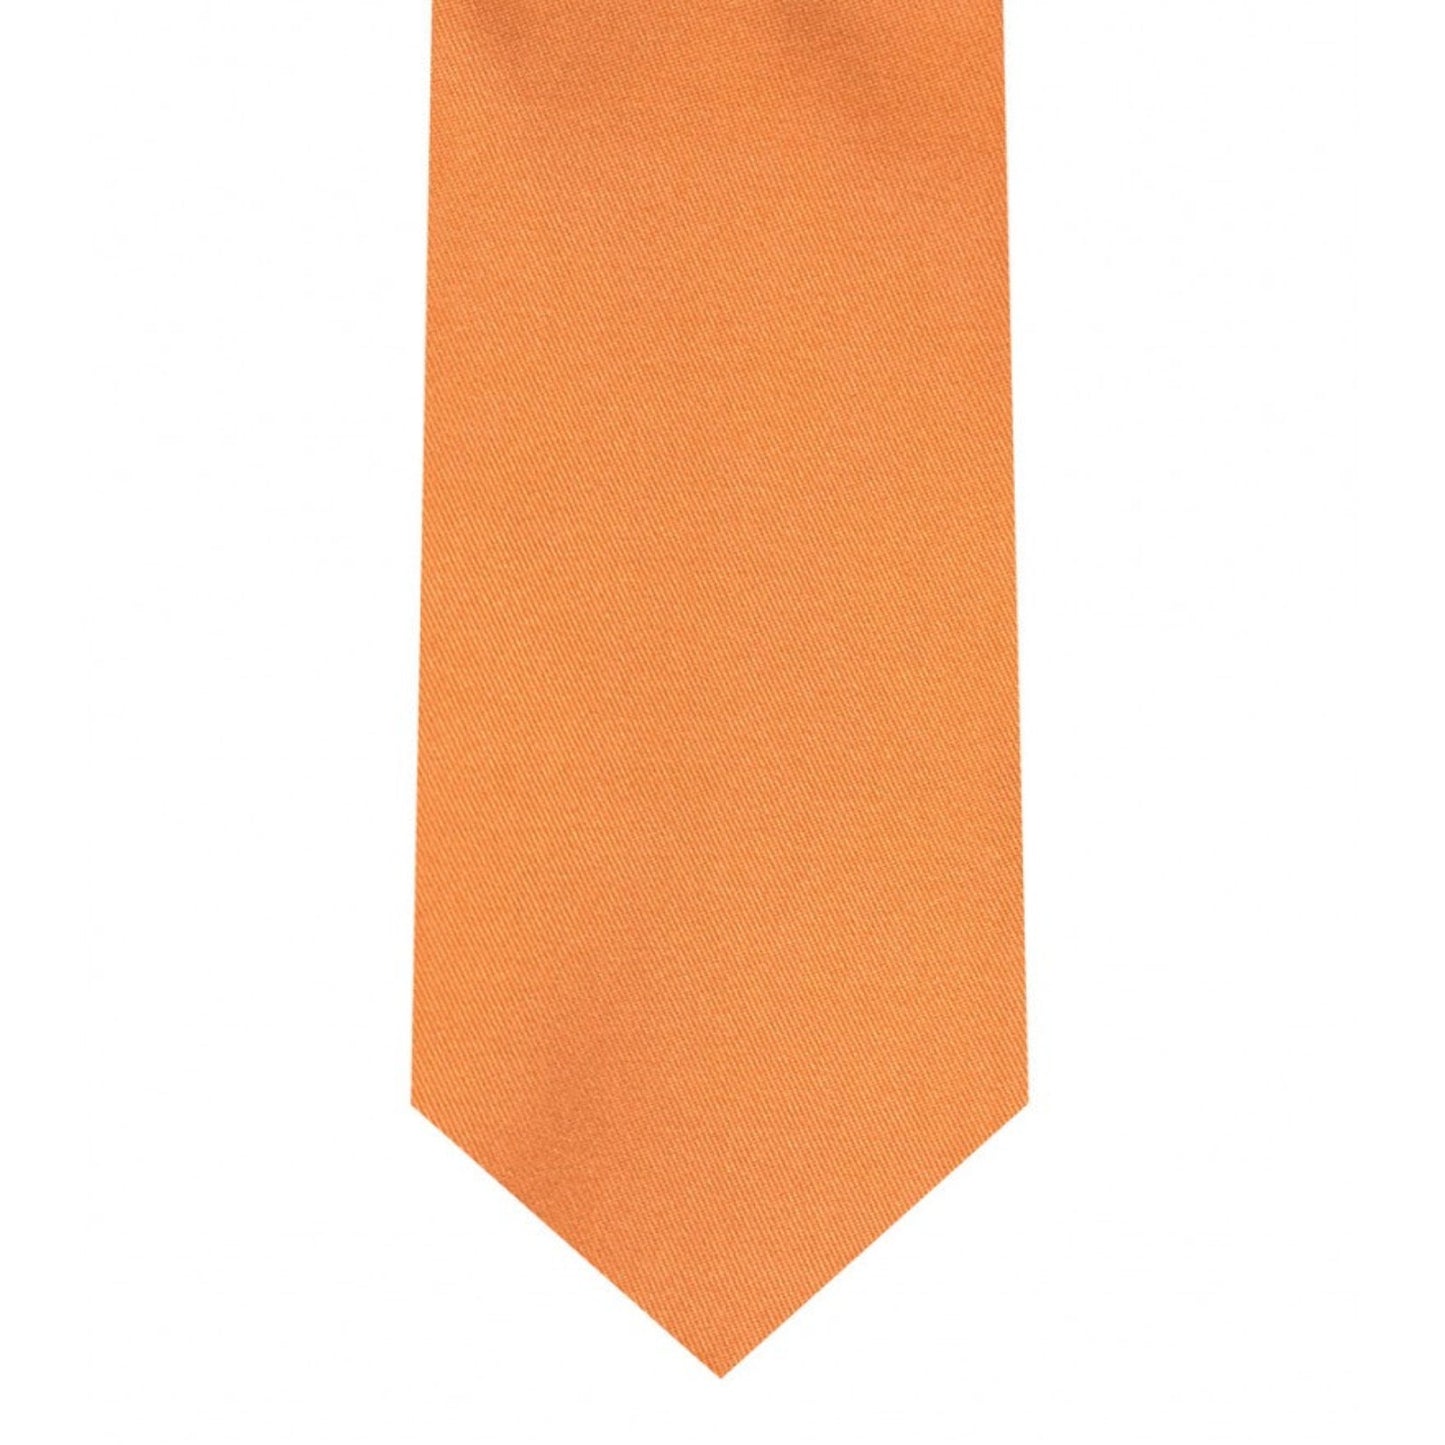 Classic Salmon Orange Tie Skinny width 2.75 inches With Matching Pocket Square | KCT Menswear